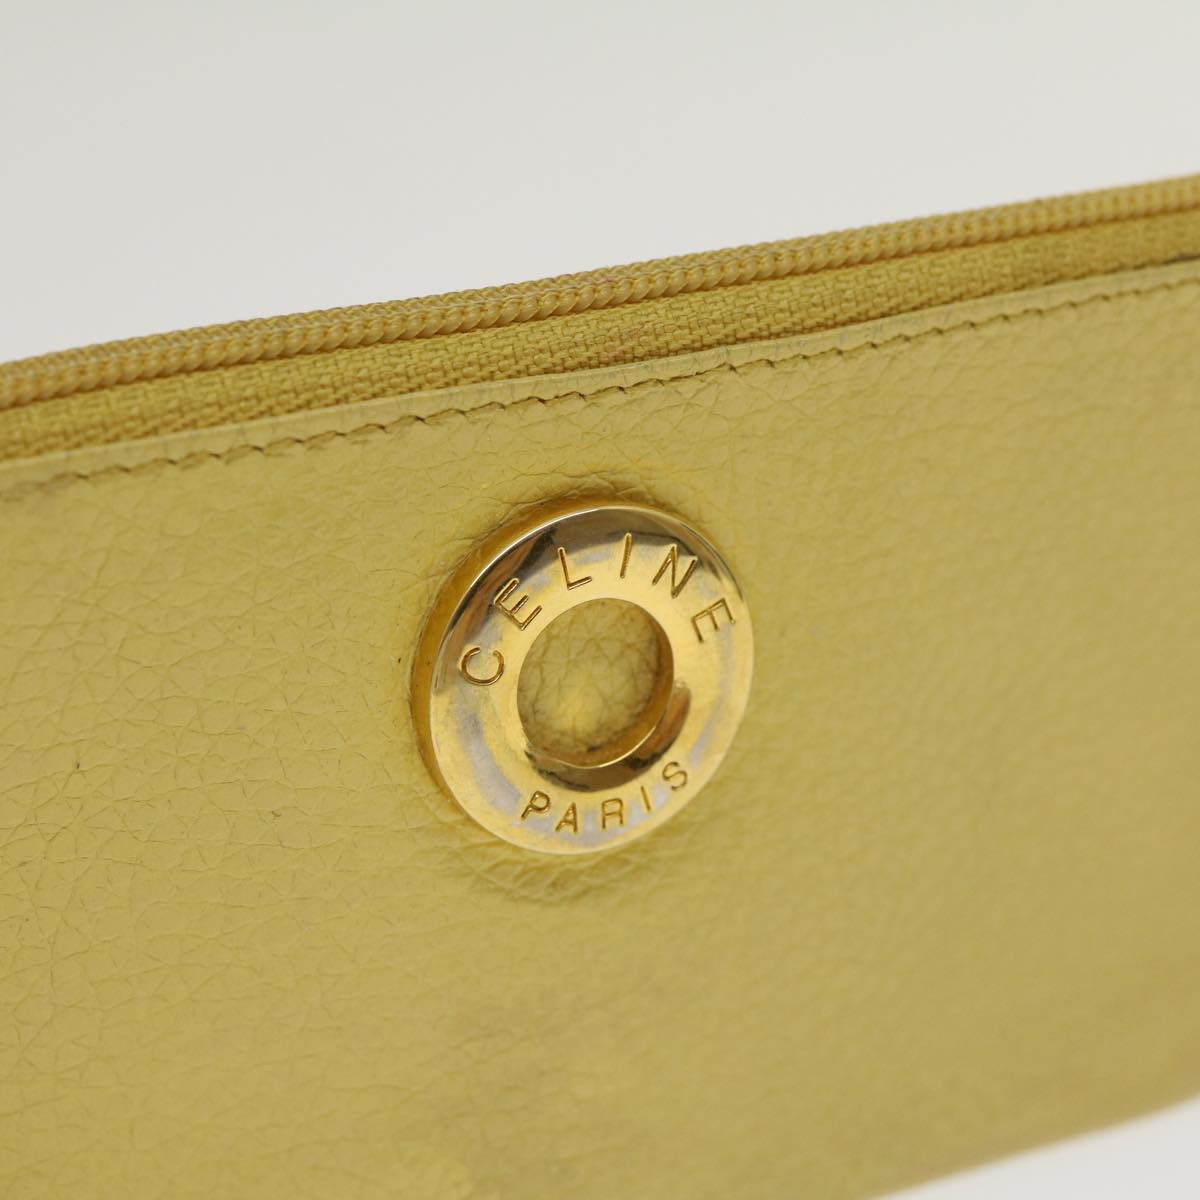 CELINE Coin Purse Leather Yellow Auth hk413